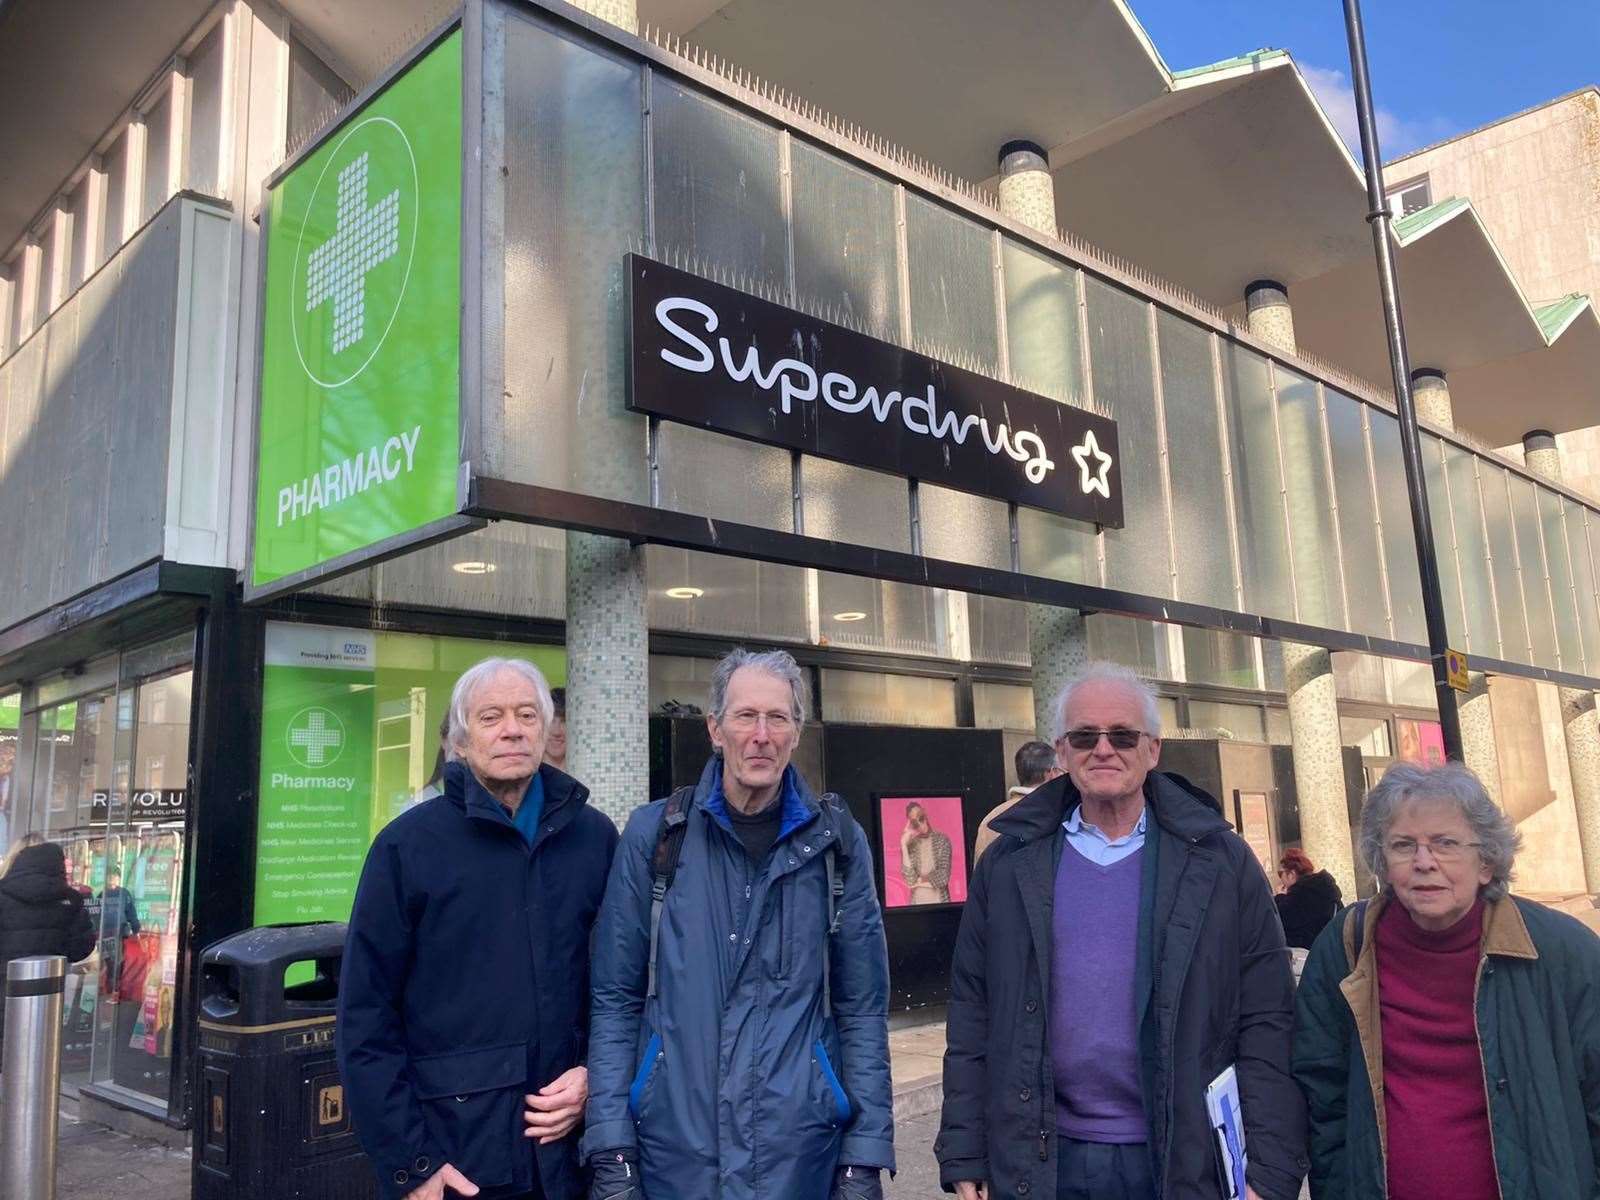 Members of the Canterbury Heritage and Design Forum stood outside the city's Superdrug